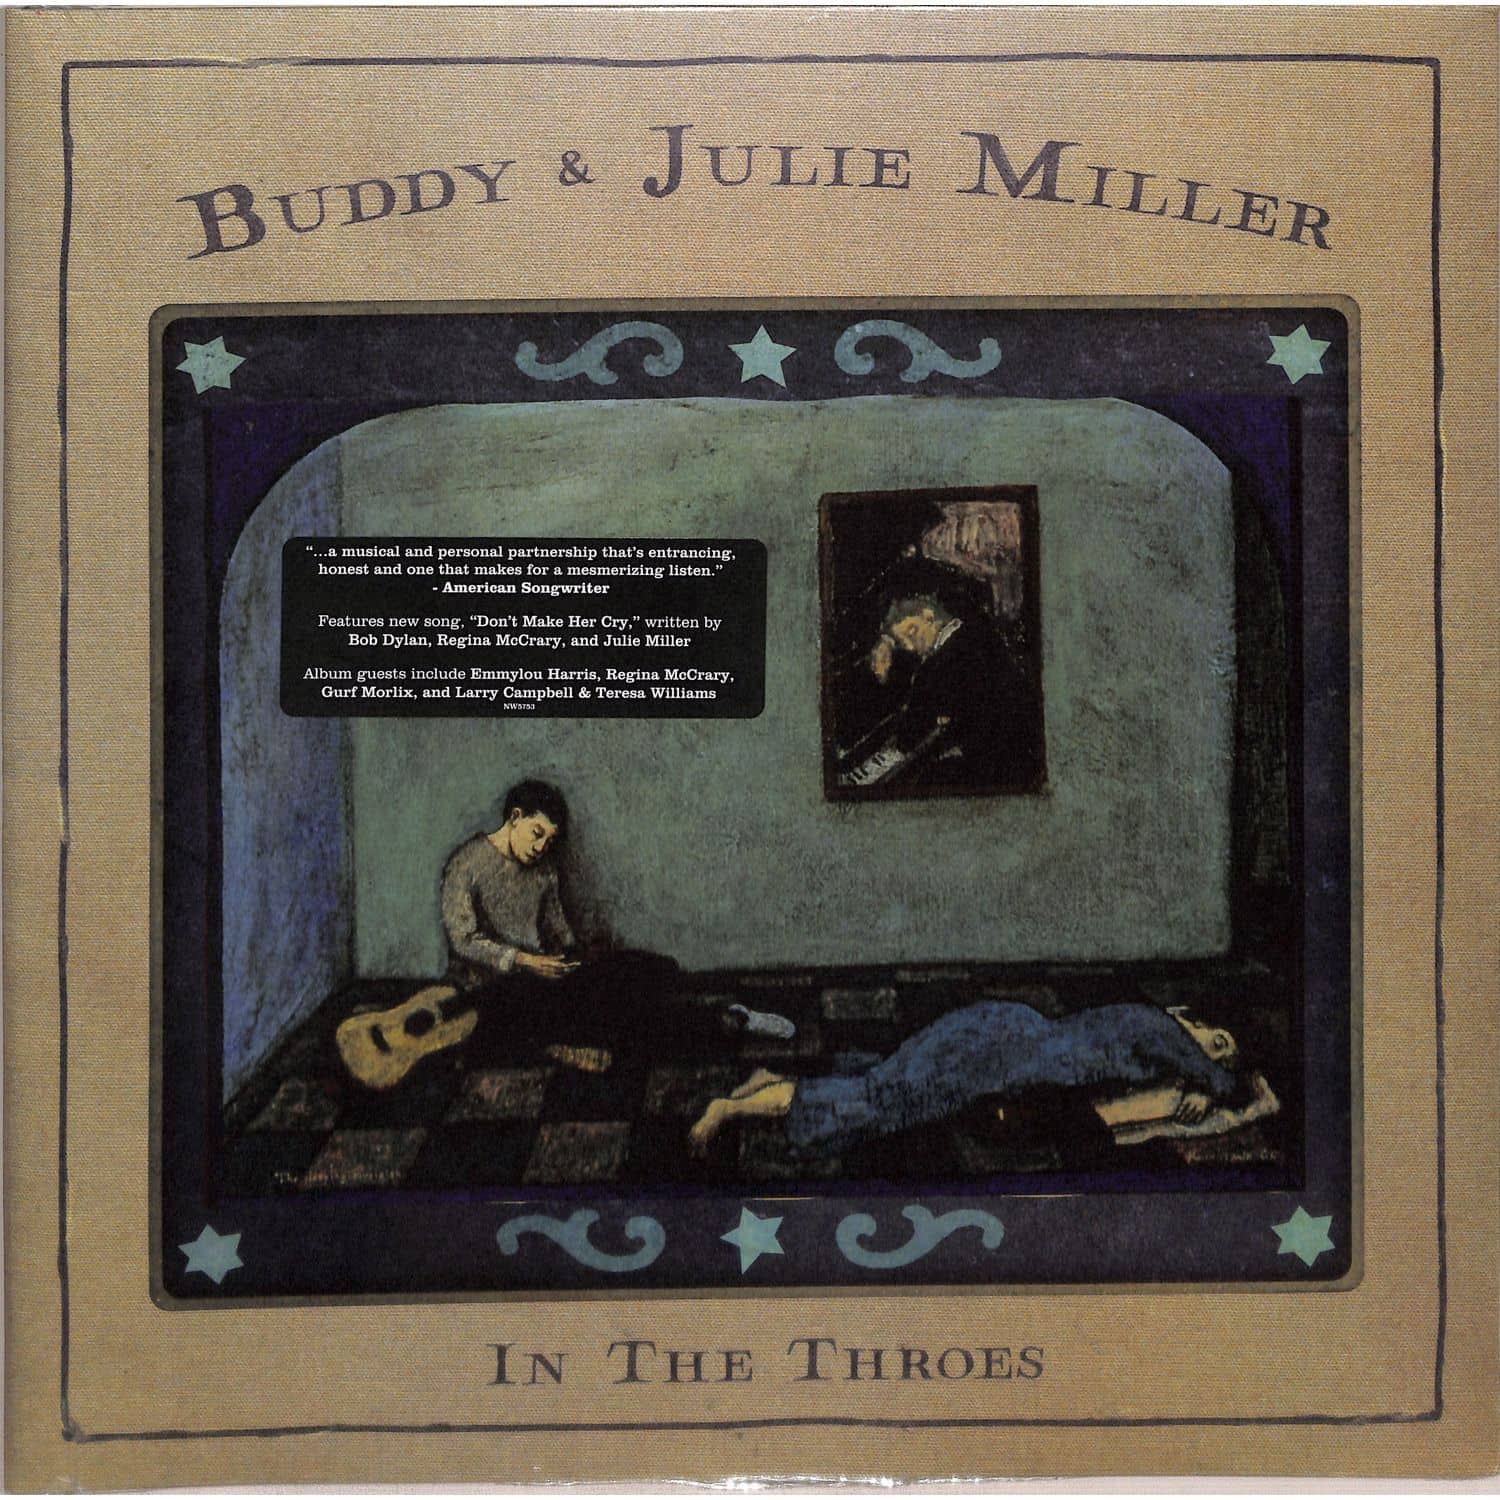 Buddy Miller & Julie - IN THE THROES 